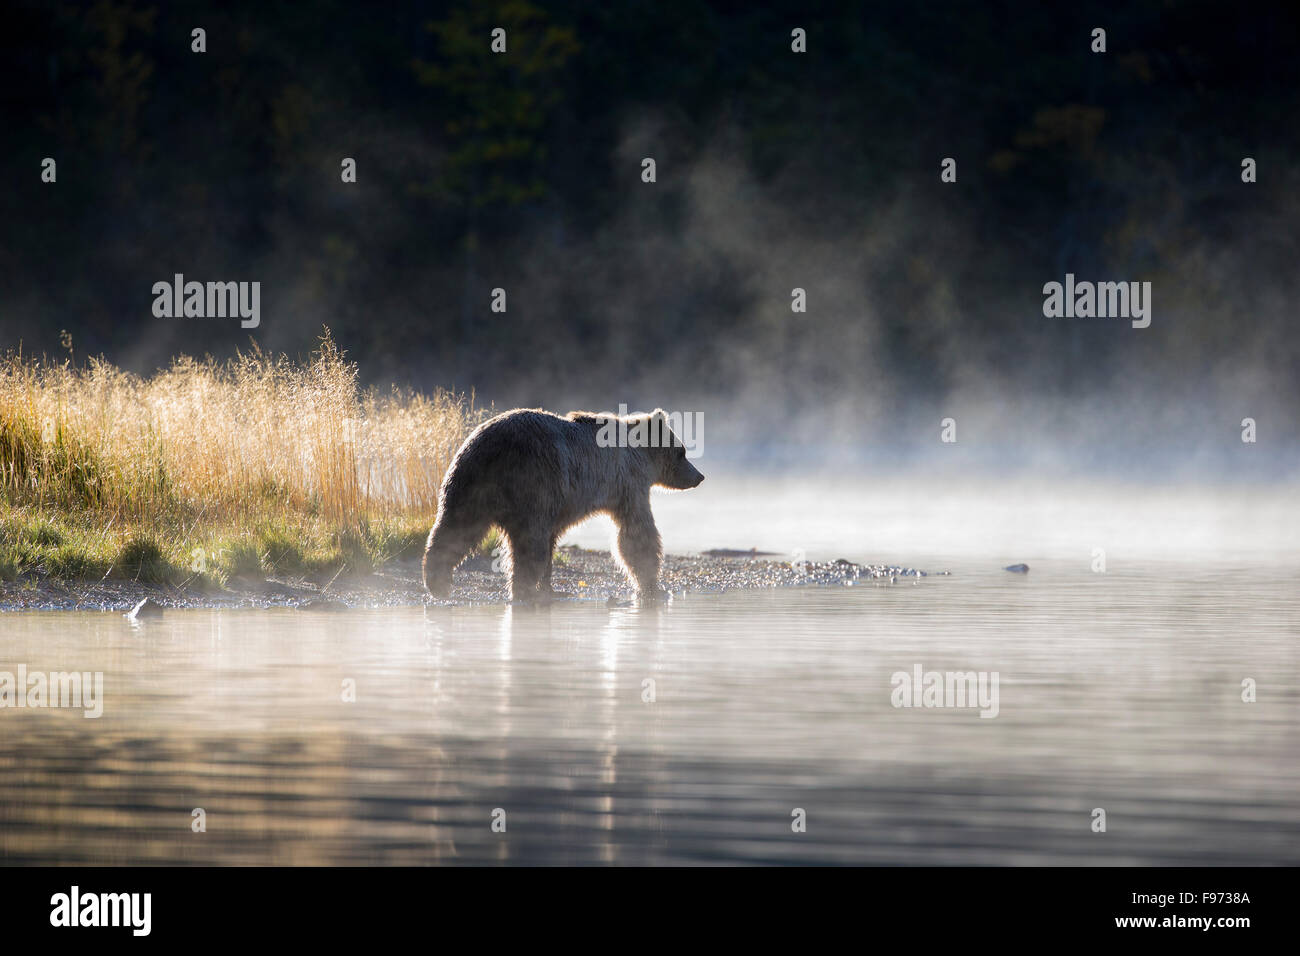 Grizzly bear (Ursus arctos horribilis), subadult, walking along river in early morning mist, Central Interior, British Columbia. Stock Photo